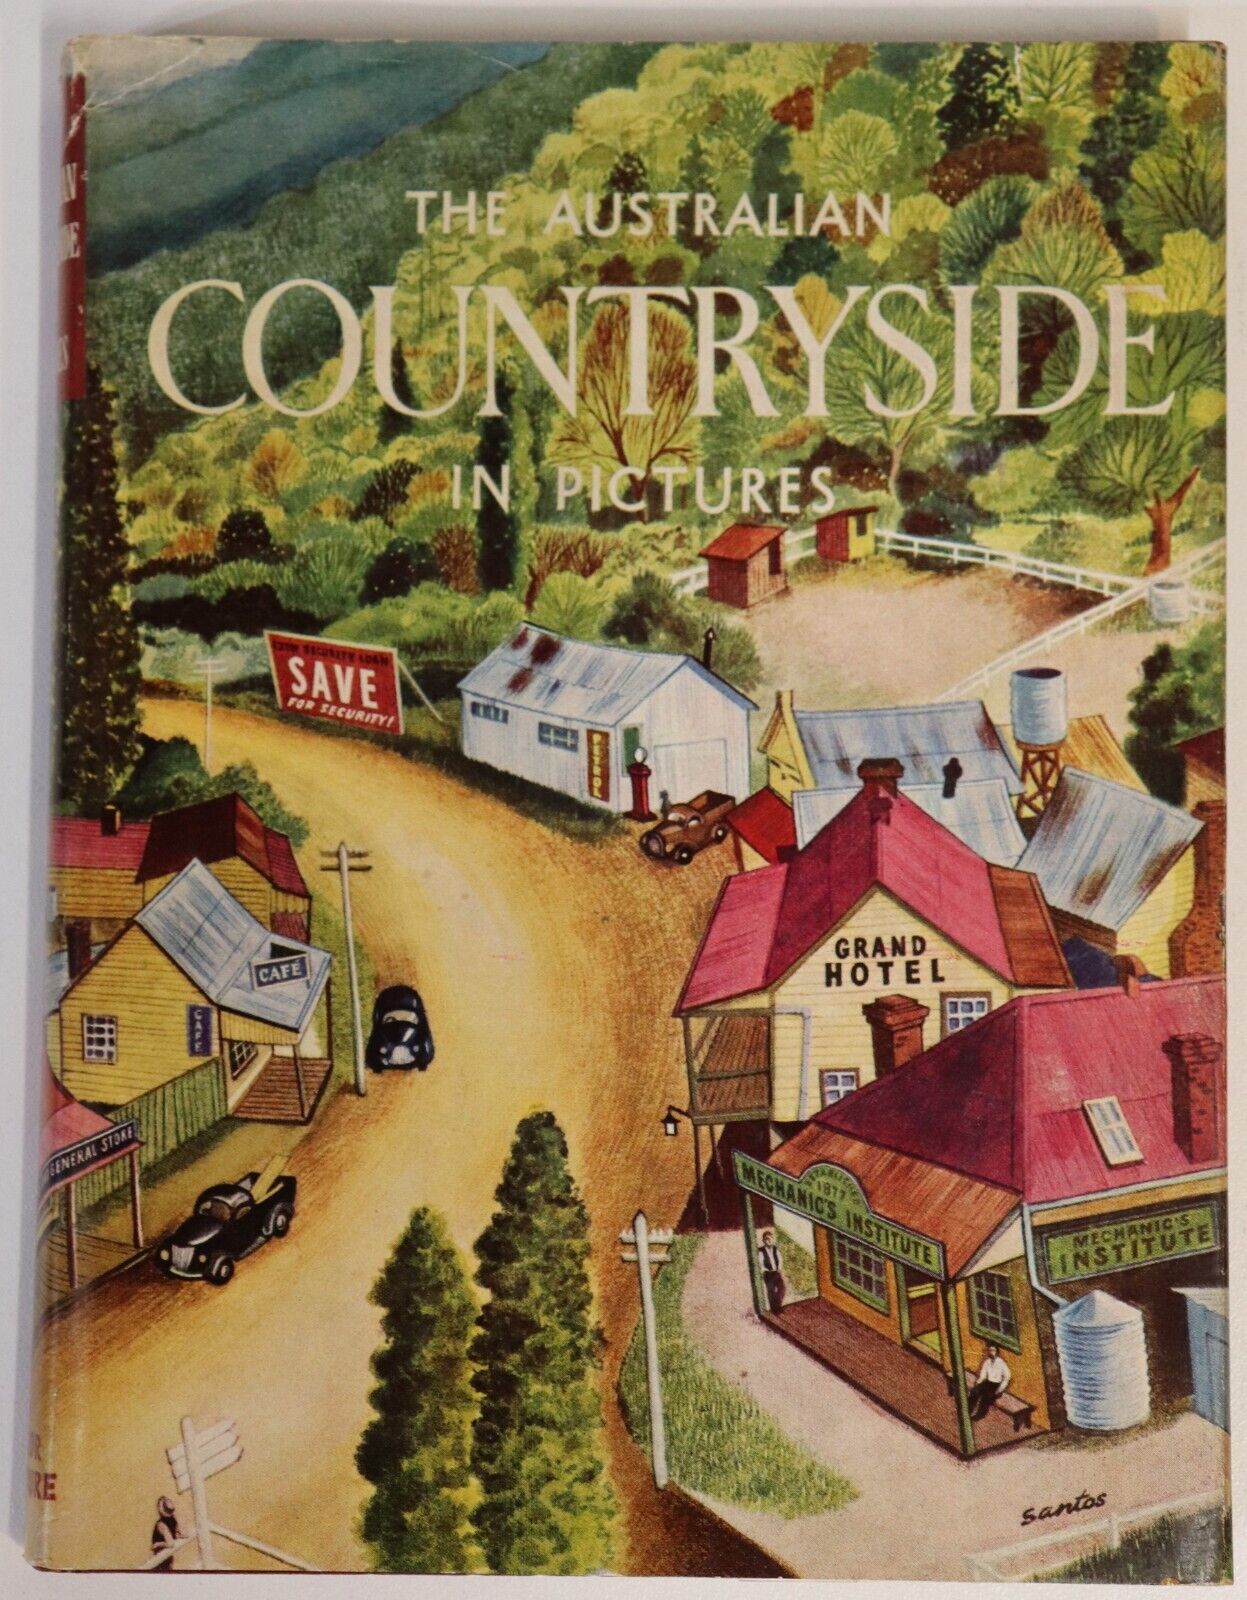 Australian Countryside In Pictures - c1950 - Vintage Australian History Book